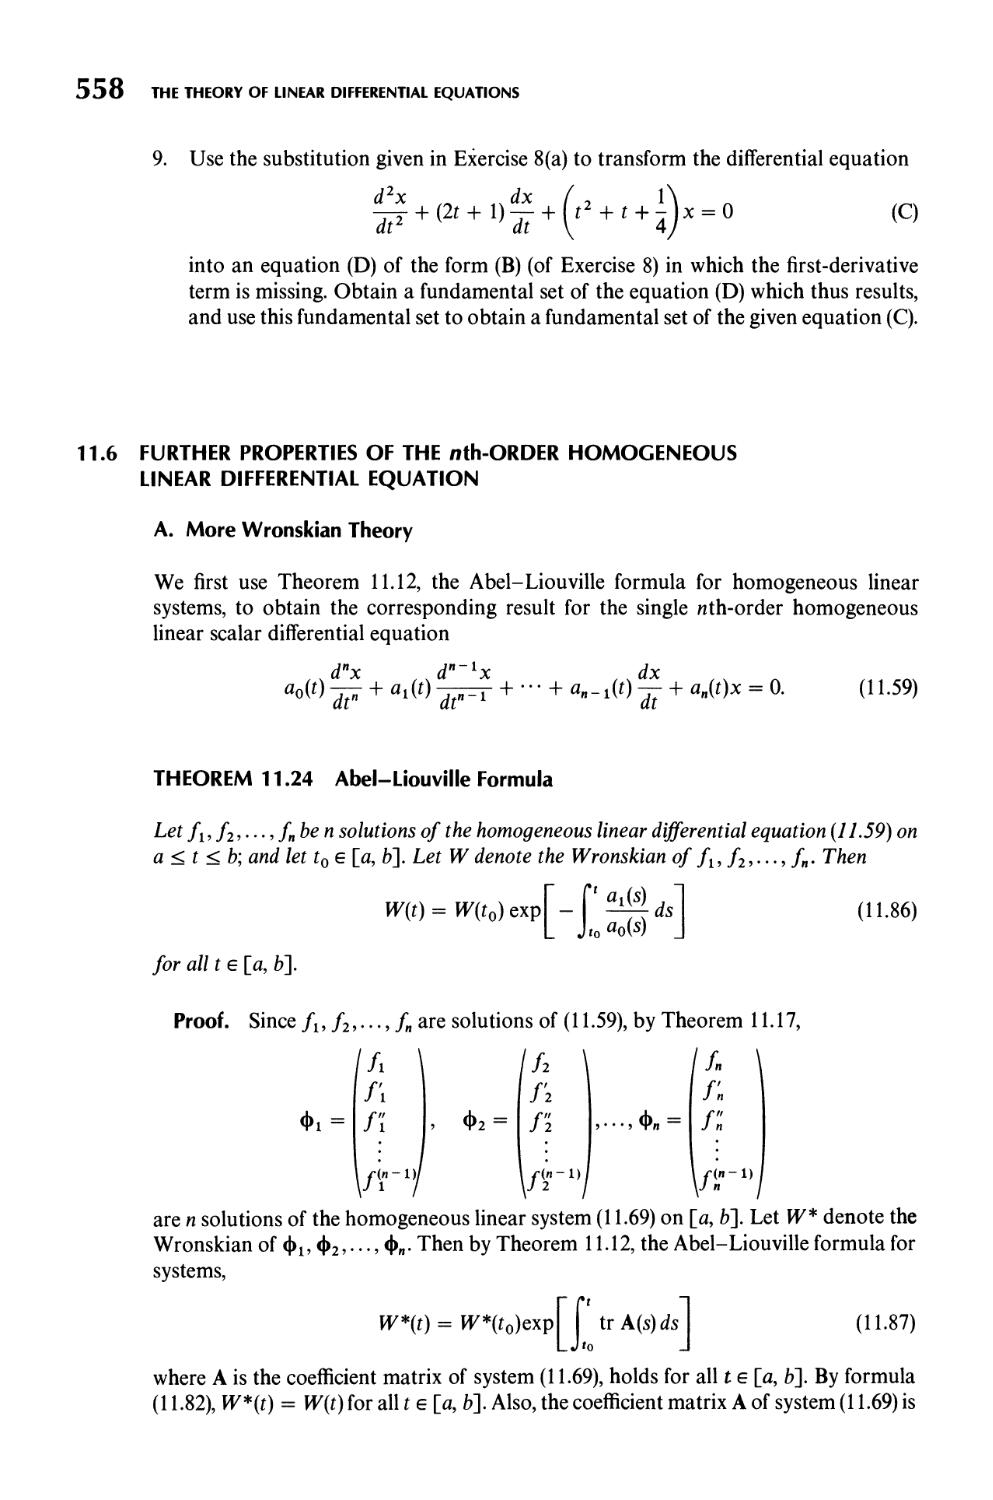 11.6  Further Properties of the nth-Order Homogeneous Linear Differential Equation